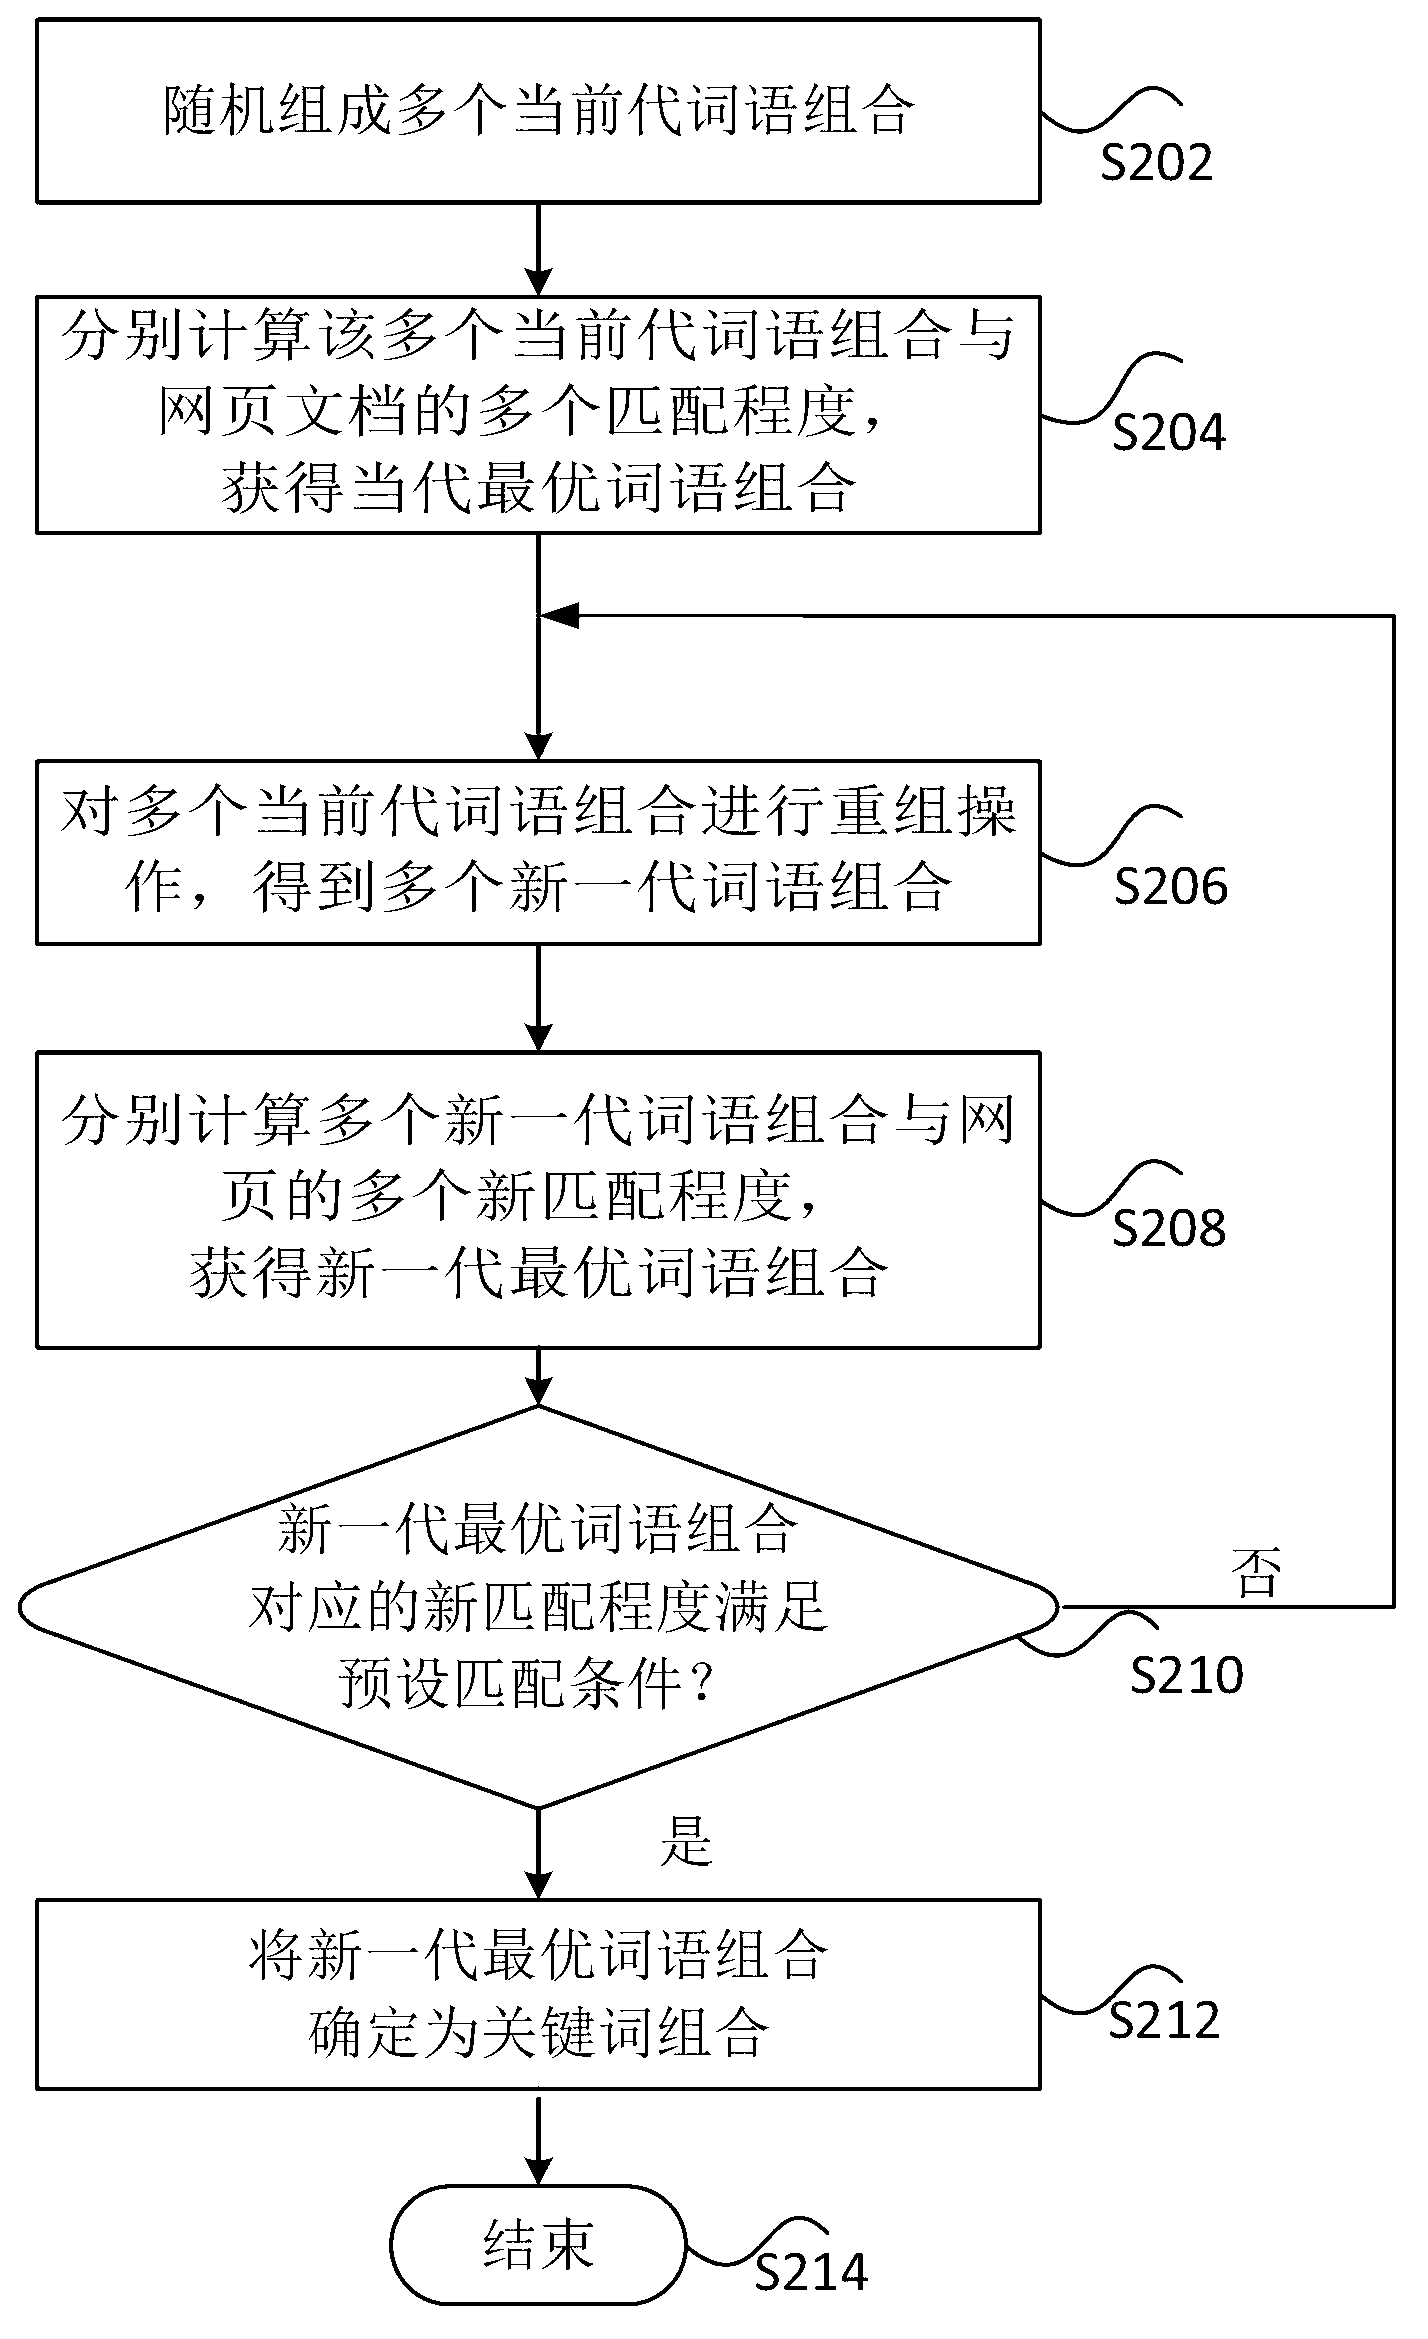 Method and device for clustering high-frequency keywords in webpages